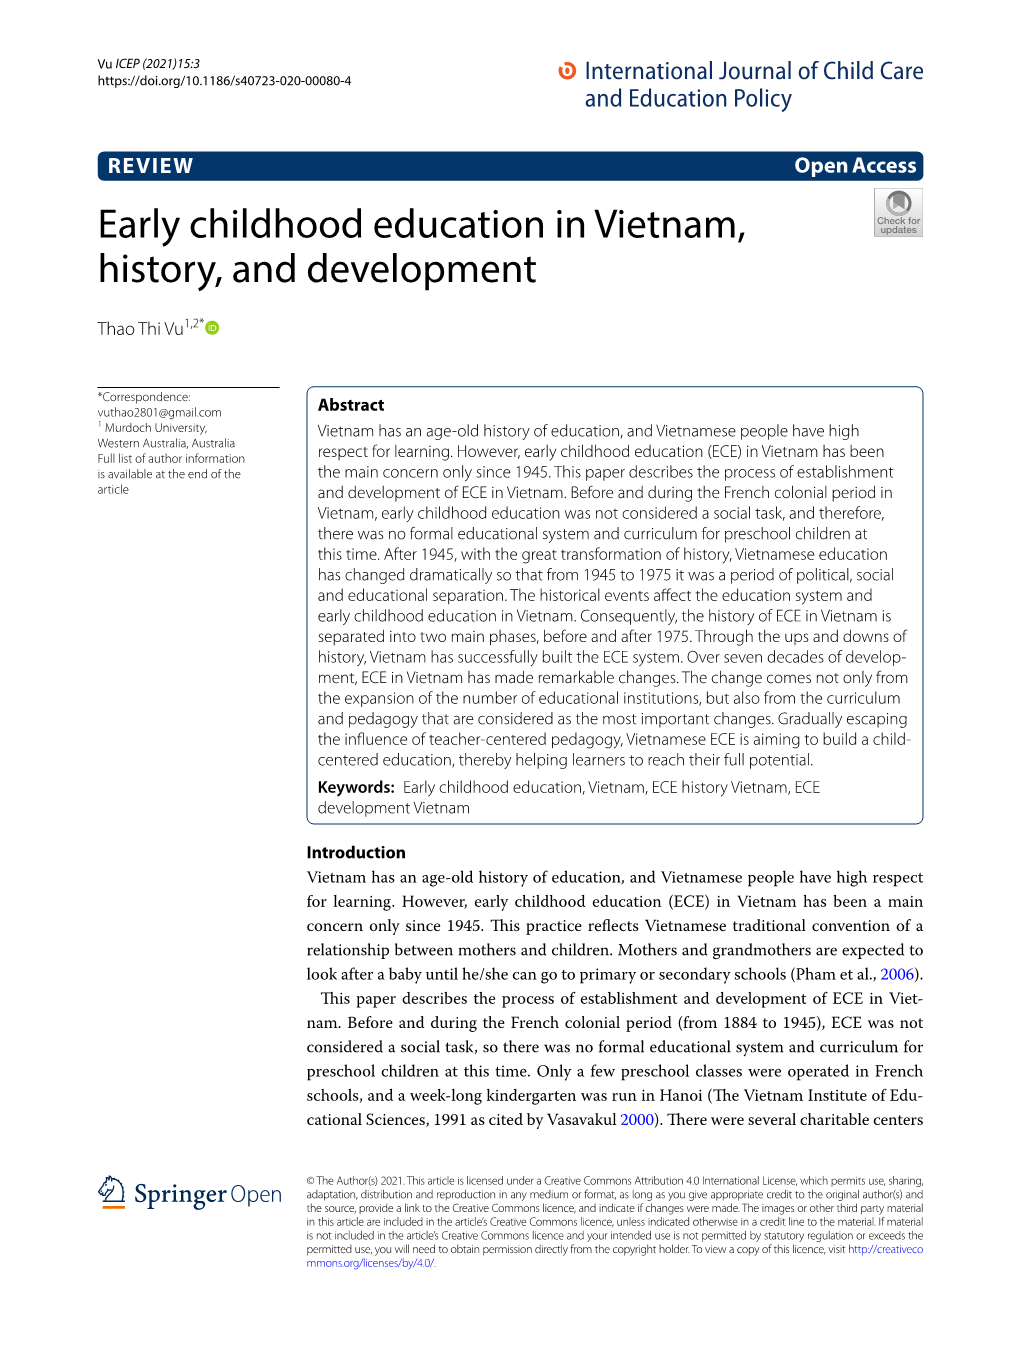 Early Childhood Education in Vietnam, History, and Development